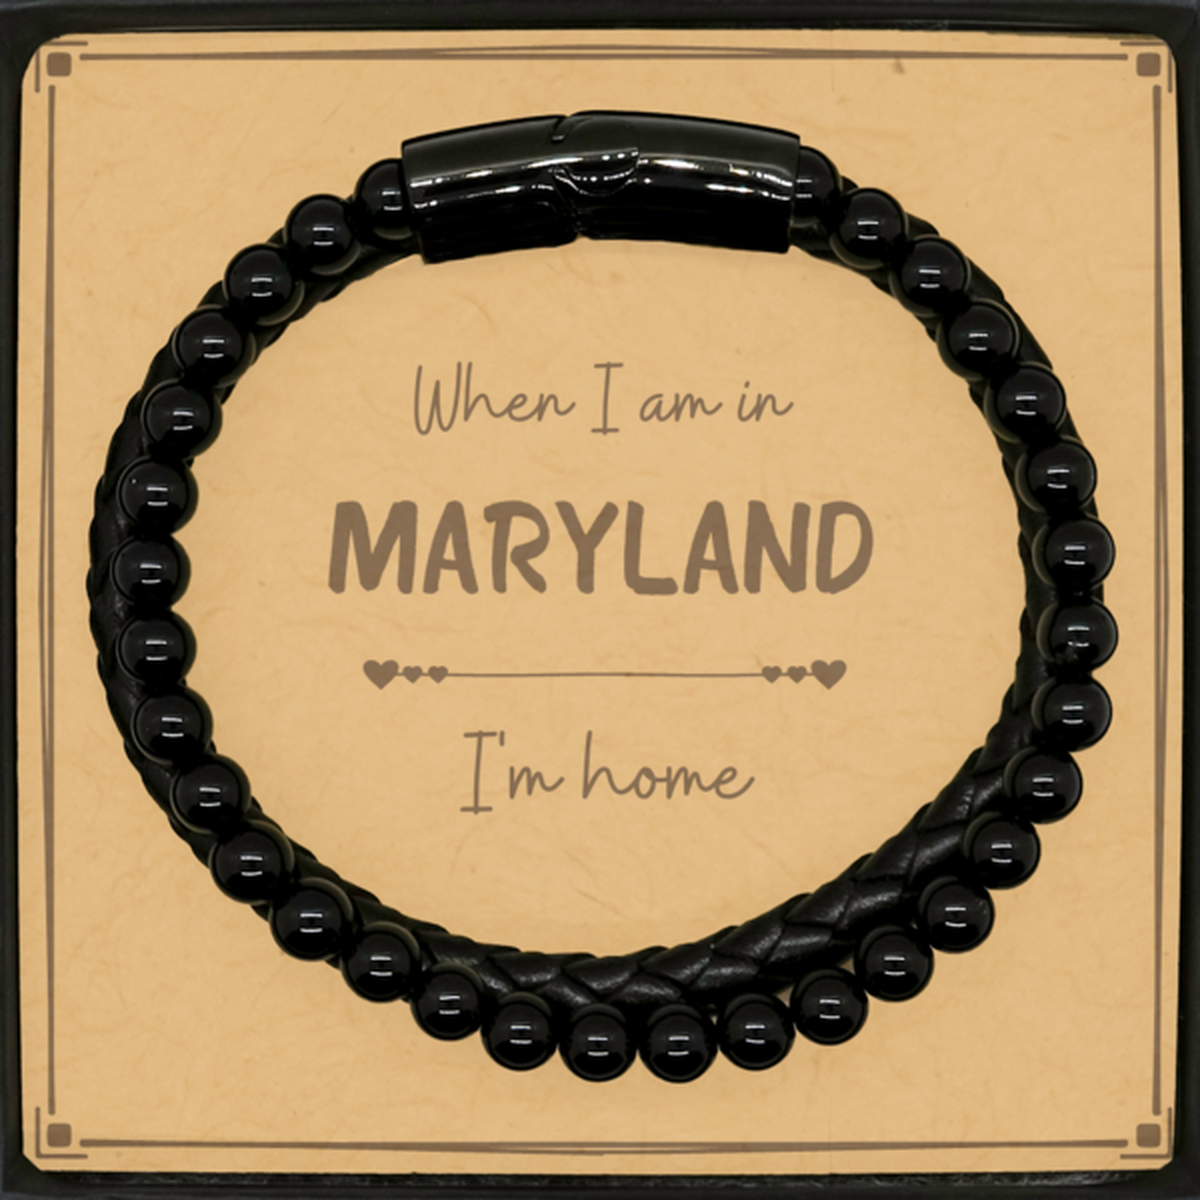 When I am in Maryland I'm home Stone Leather Bracelets, Message Card Gifts For Maryland, State Maryland Birthday Gifts for Friends Coworker